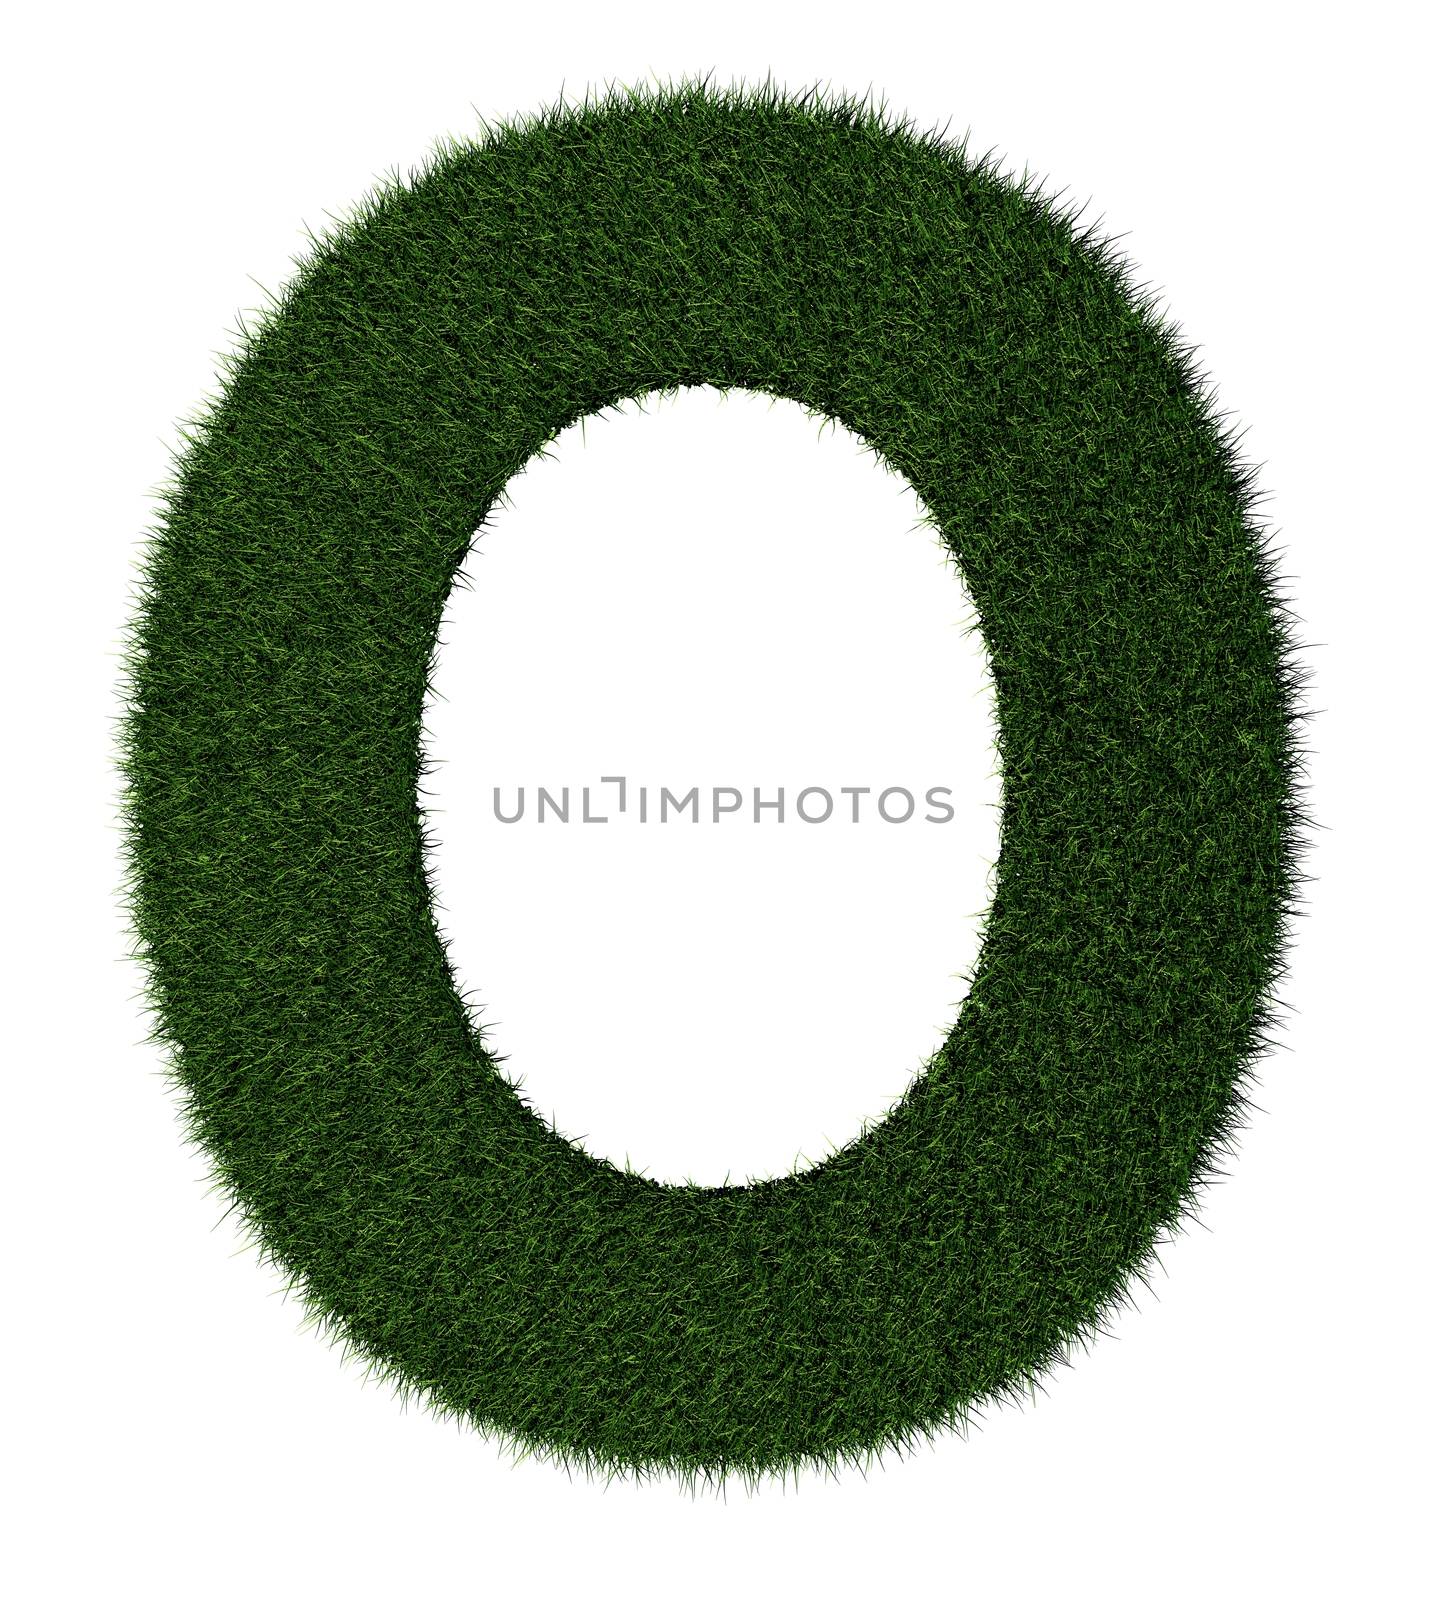 Letter O made with blades of grass